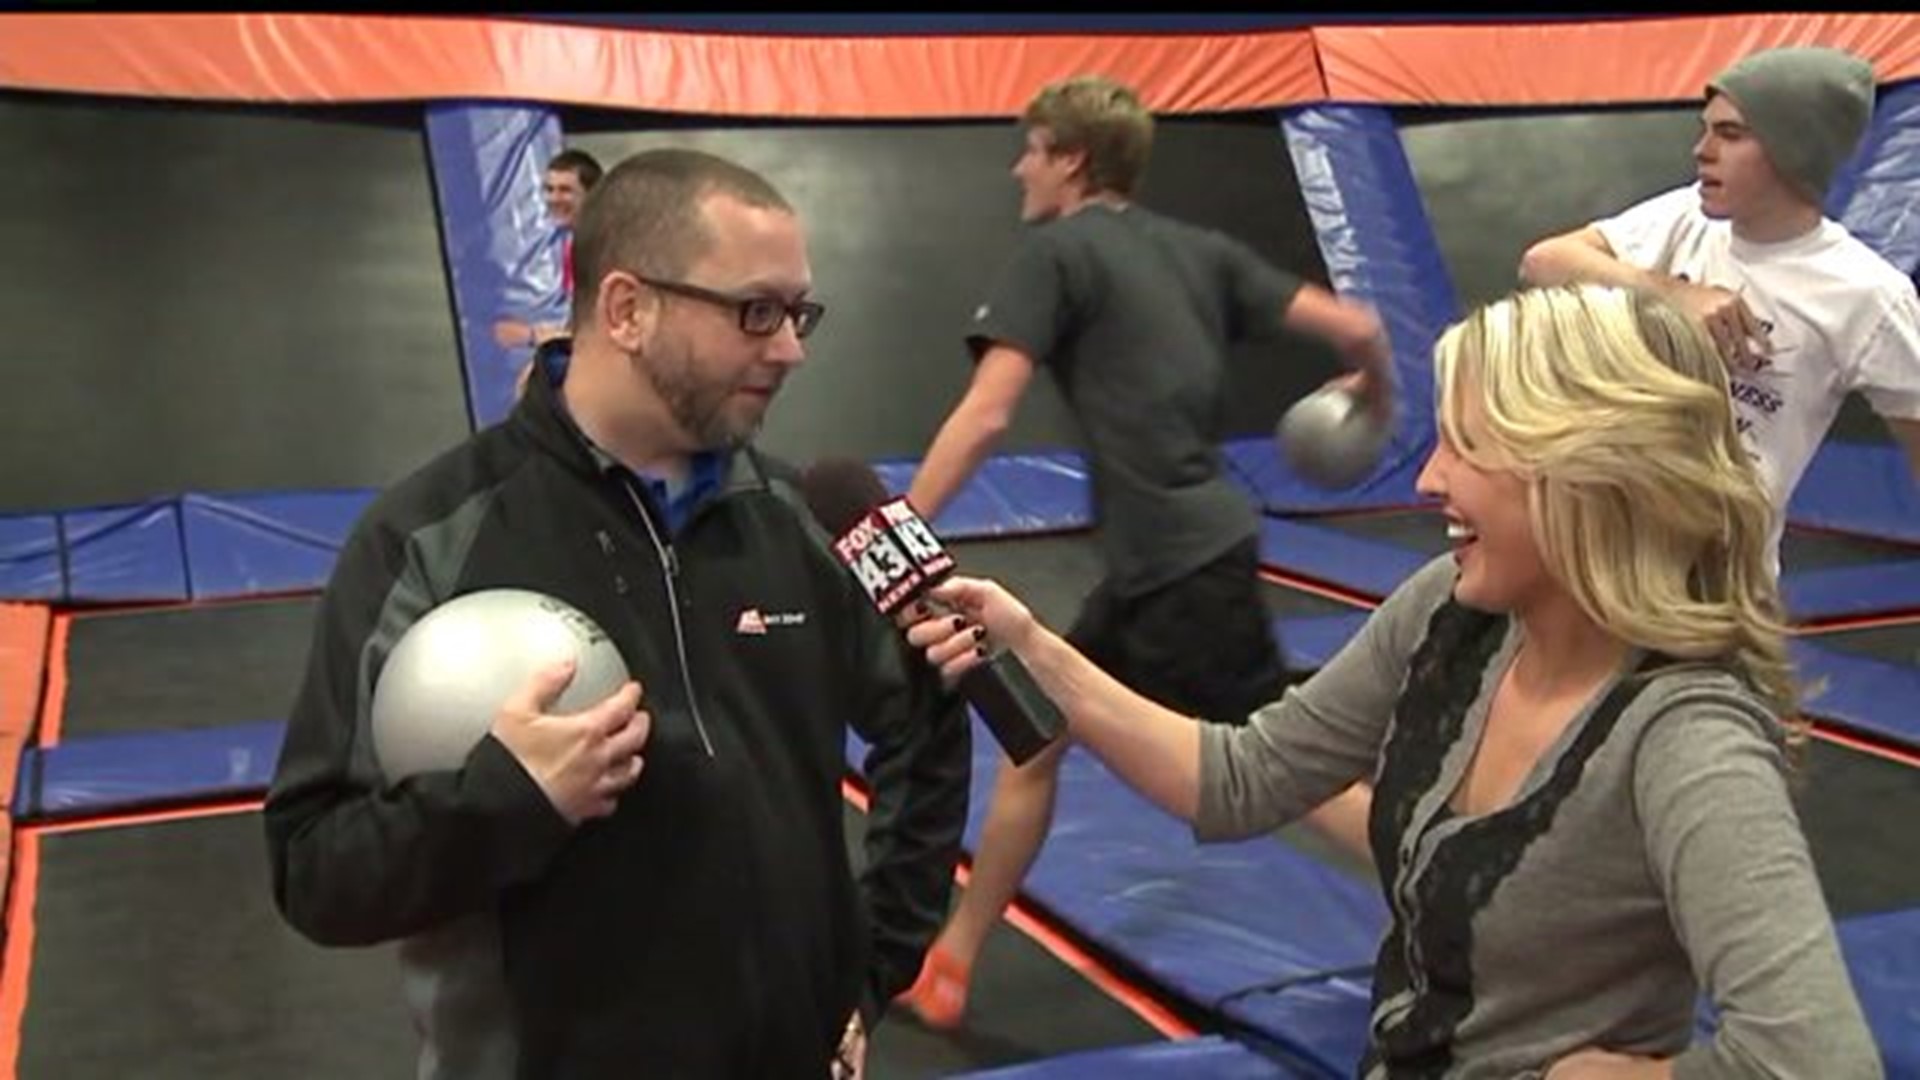 Staying active can be fun at Sky Zone